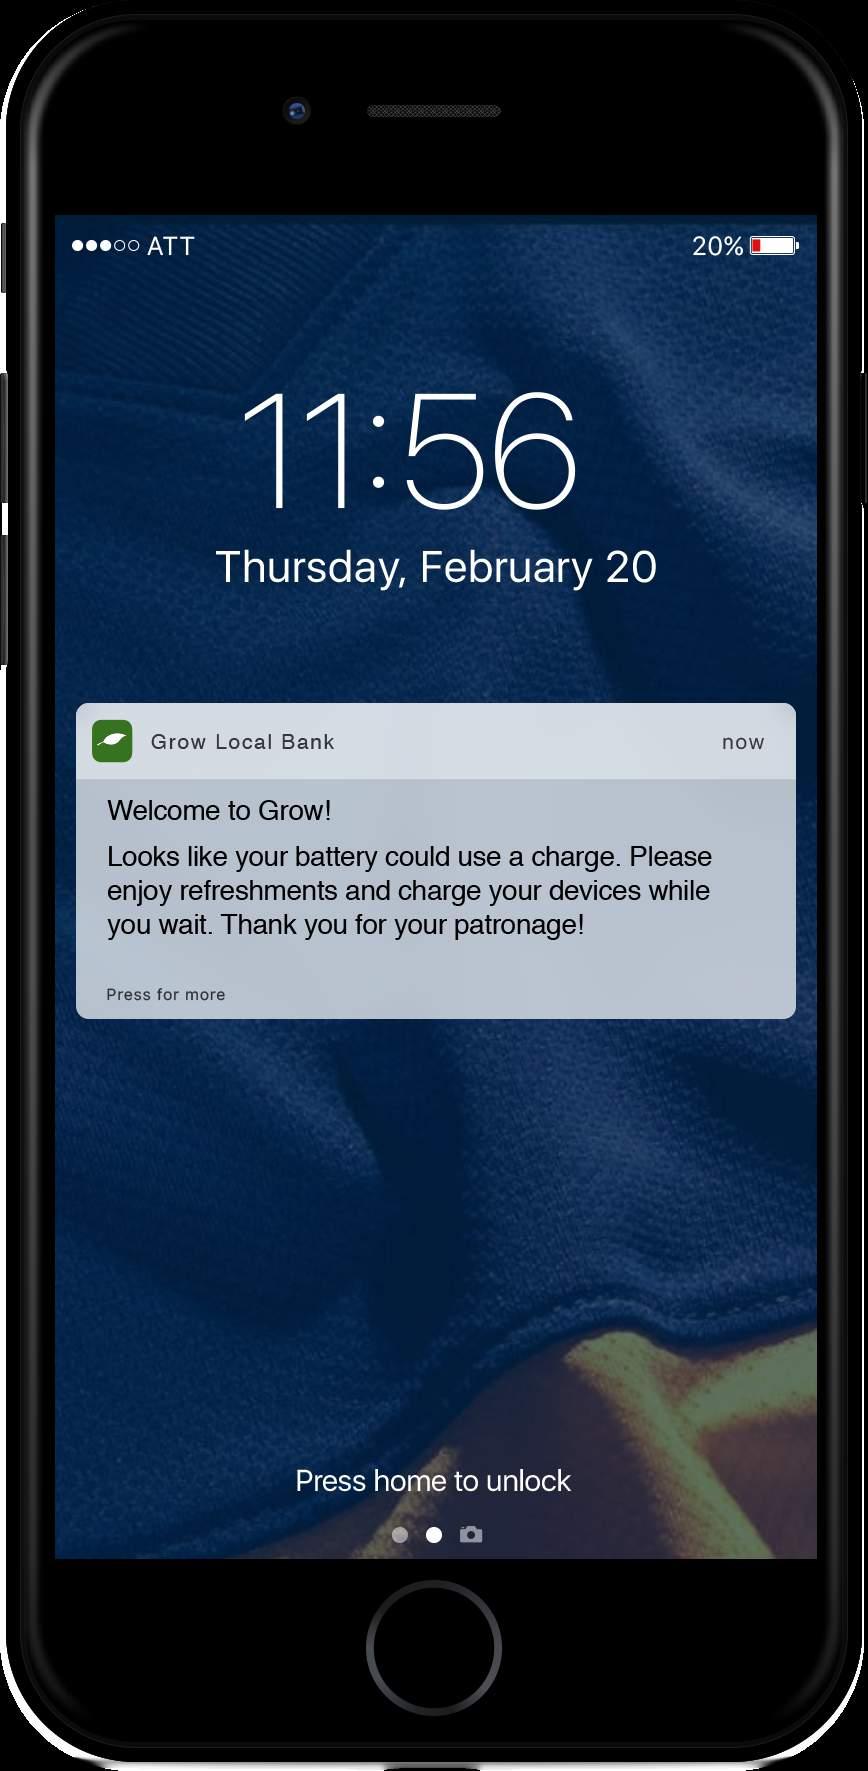 Better still trigger a notification when their battery is running low to encourage them to top up on one of the many wireless charging hotspots